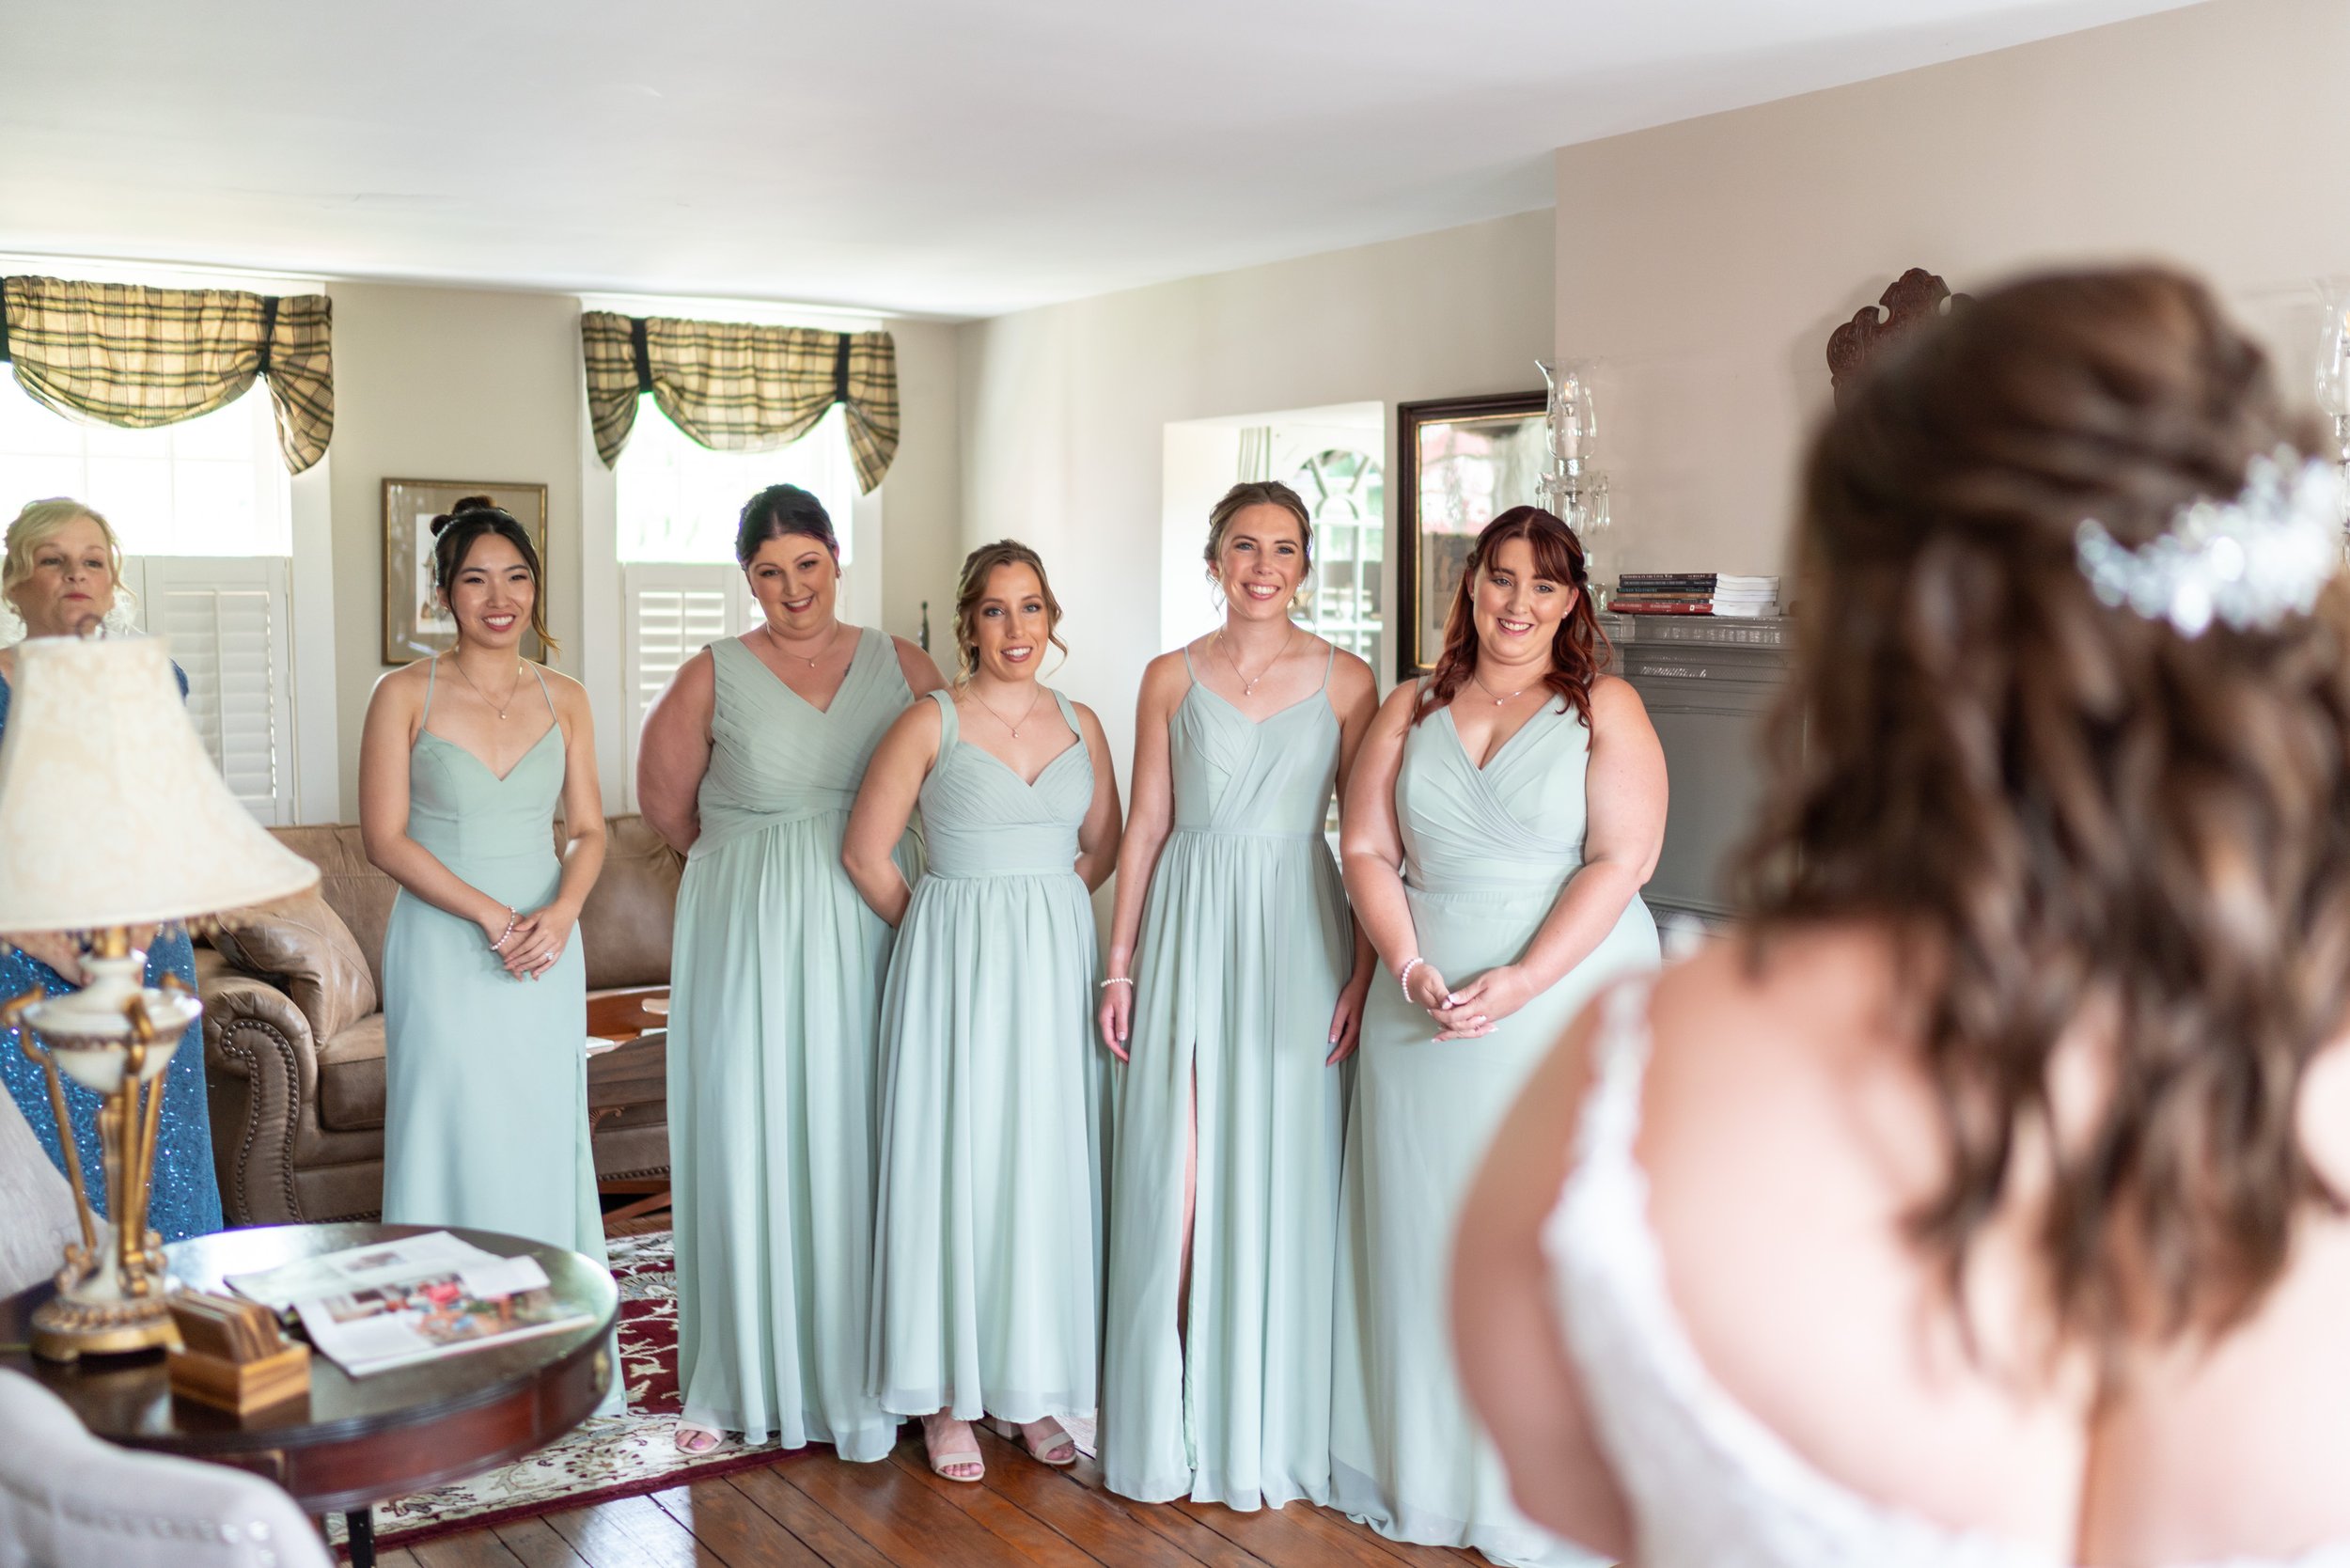 Bride and bridesmaids doing bridesmaid first look